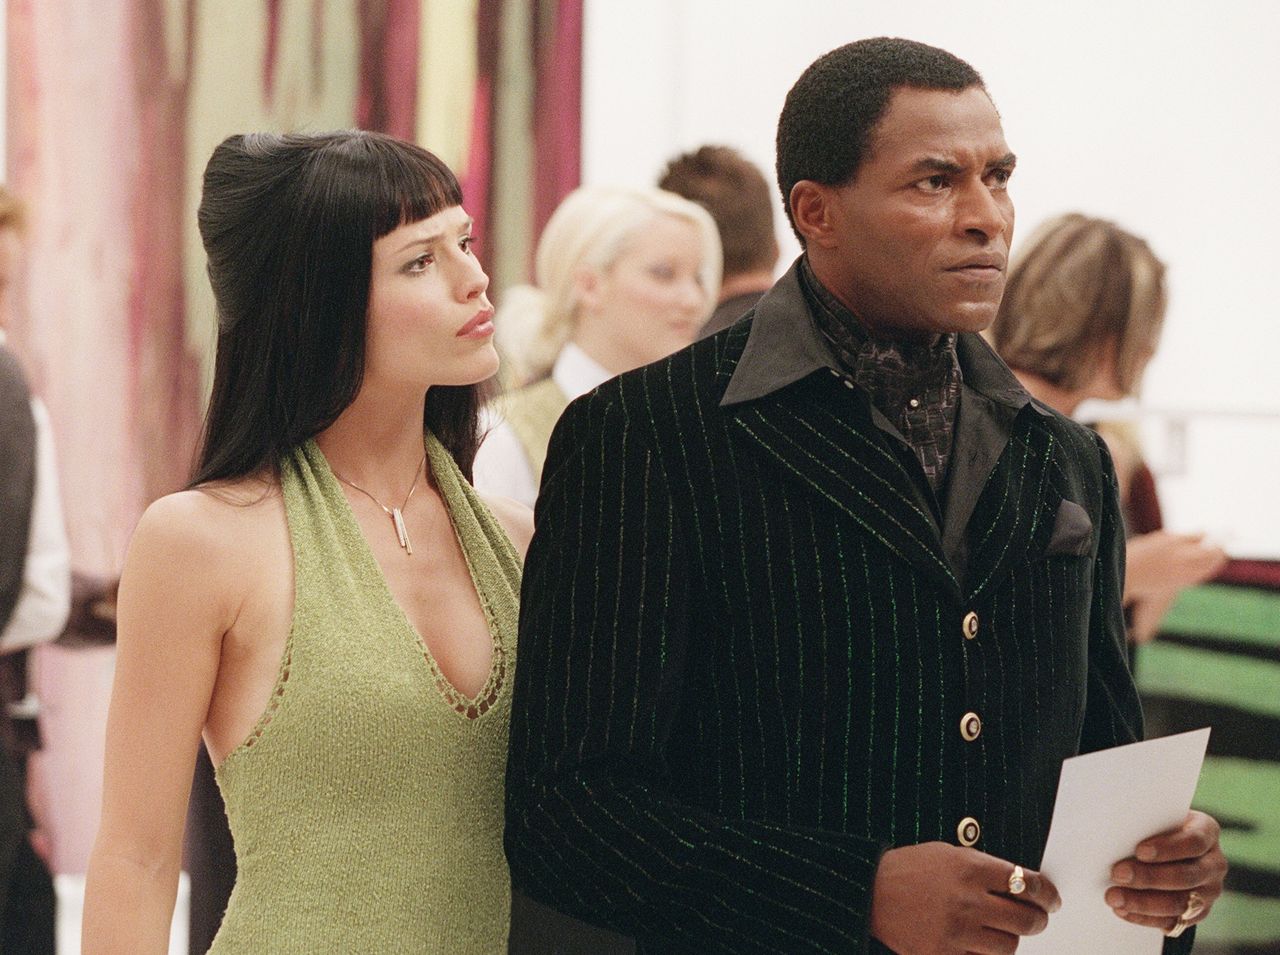 Jennifer Garner and Carl Lumbly in a first season episode of "Alias." Garner told HuffPost, “I have been waiting for Carl Lumbly to have his day.”